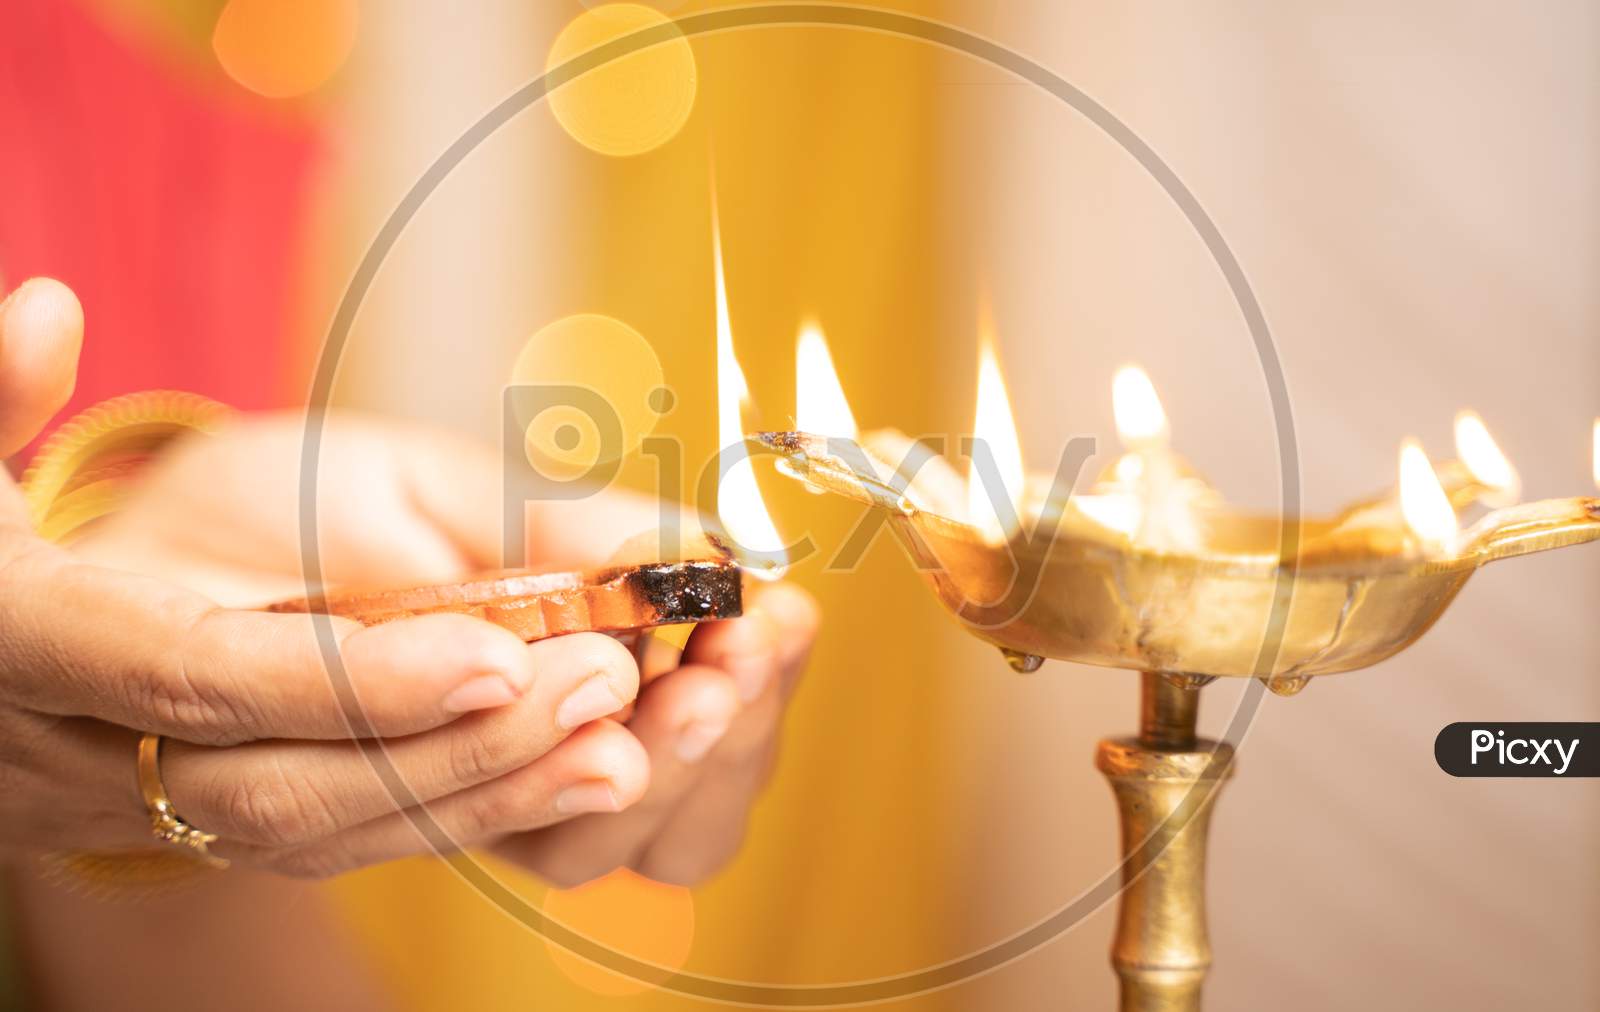 Closeup Of Woman Hands Lighting Lantern Diya Or Lamp During Festival Ceremony - Concept Of Traditional Indian Festival And Ritual Celebrations.